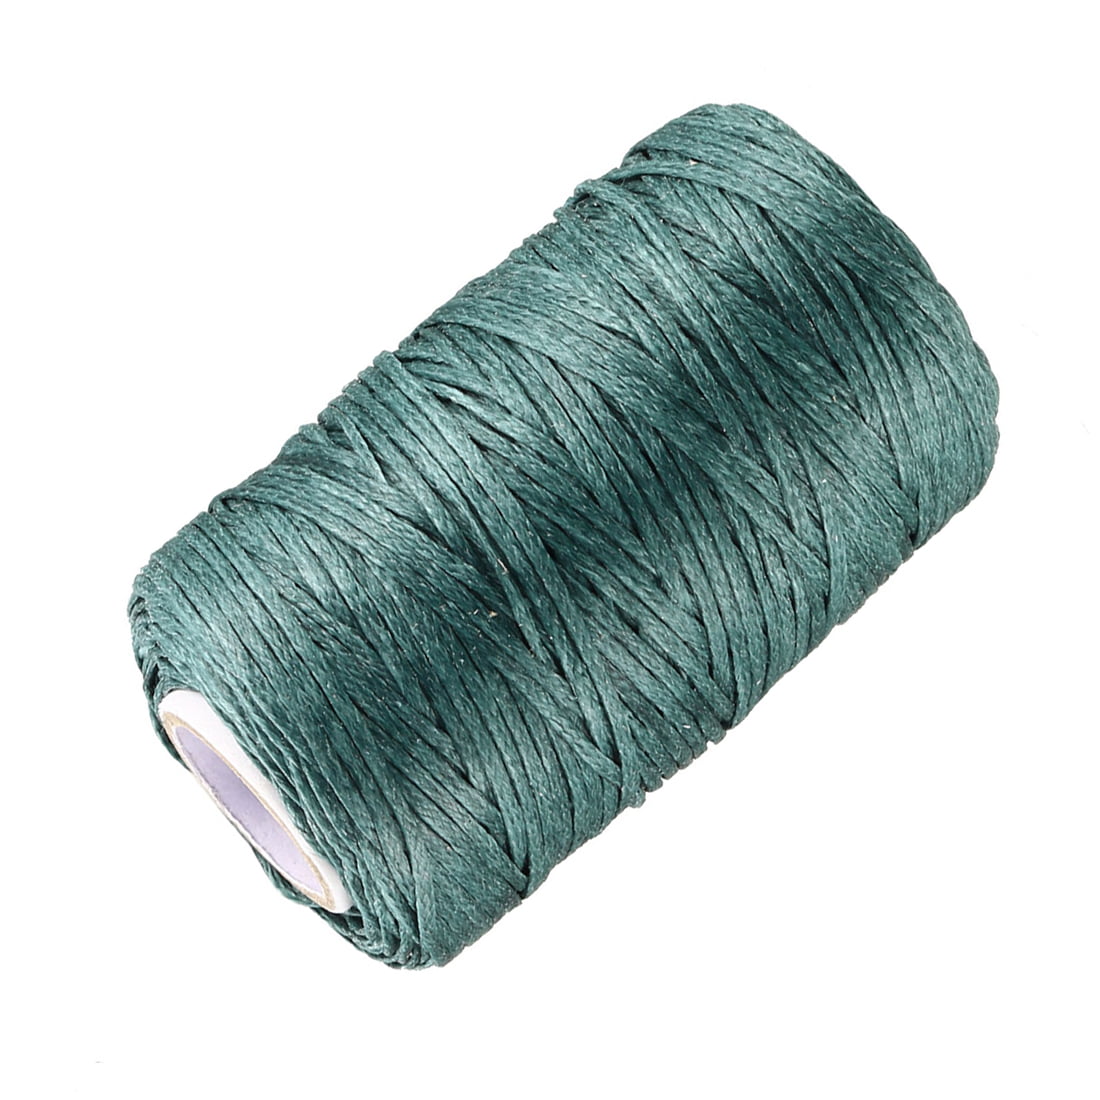 SEWACC 1pc Wax Thread for Leather Sewing Thread Leather Stitching Cord  Leathercraft Waxed Thread Dot to Dot Books for Adults Green Thread Leather